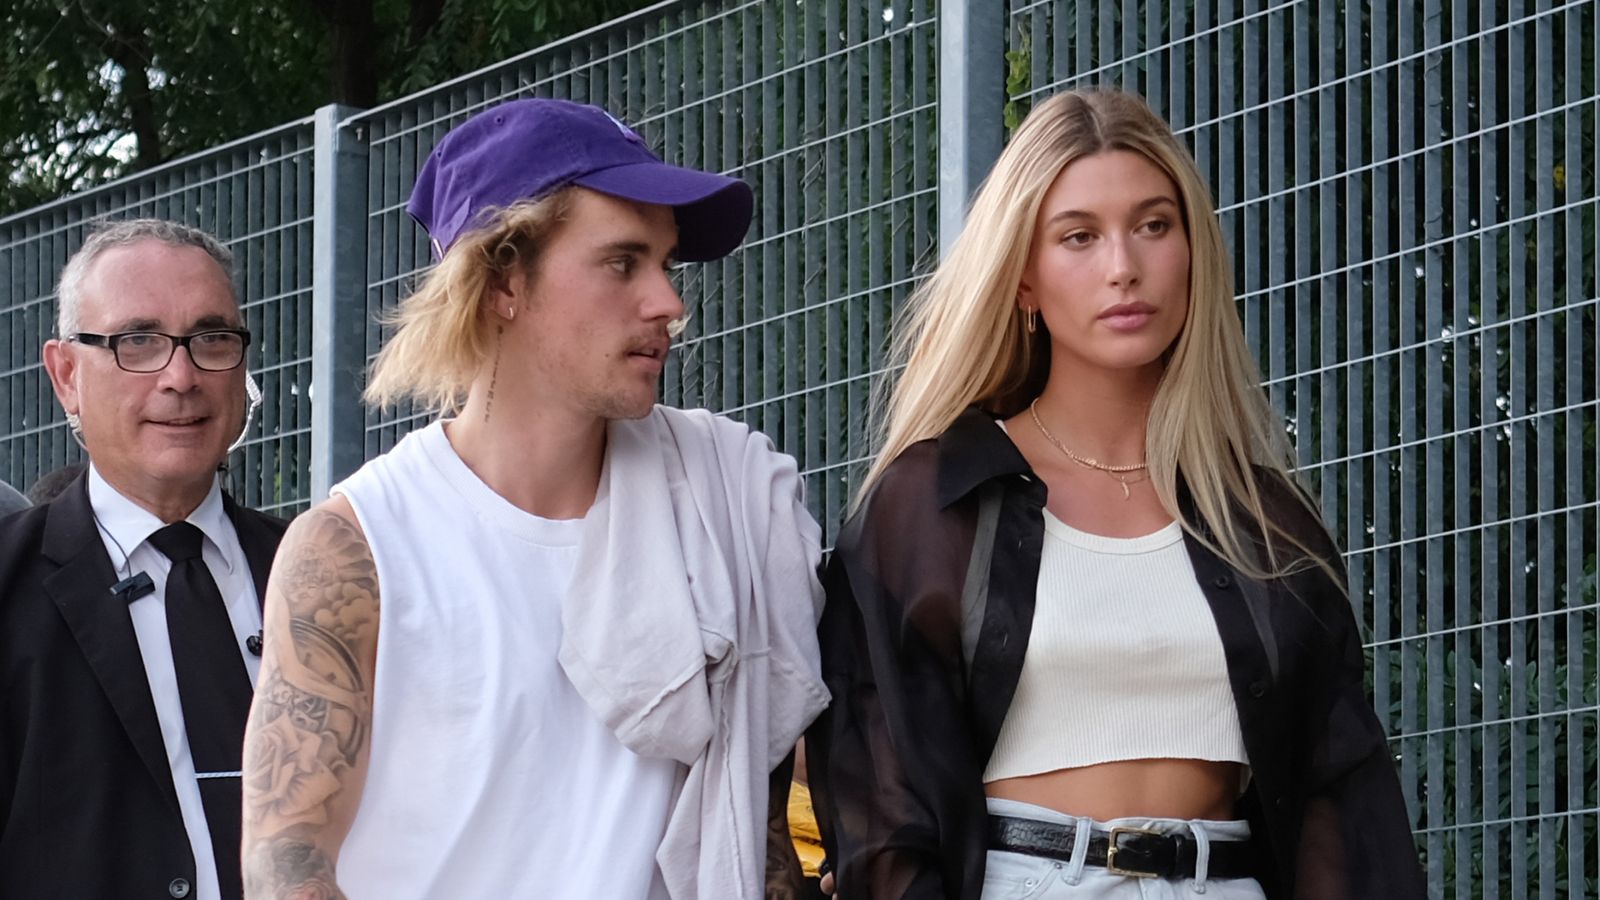 Hailey Bieber Reveals First Pictures Of Her Unusual Wedding Dress Ents And Arts News Sky News